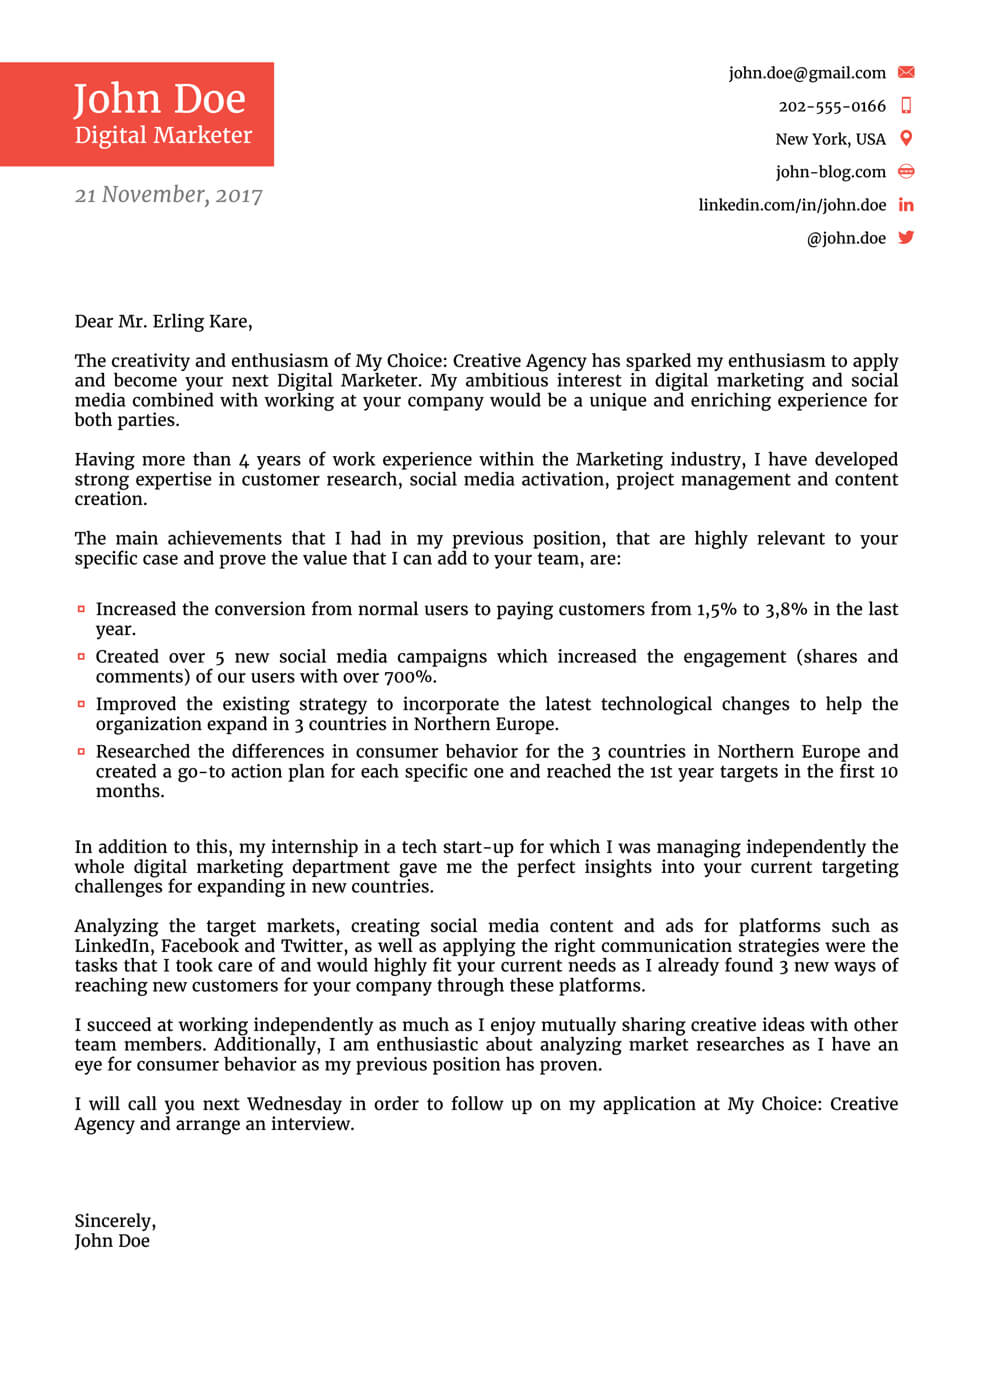 8+ Cover Letter Templates For 2020 [That Hr Will Love!] With Account Closure Letter Template